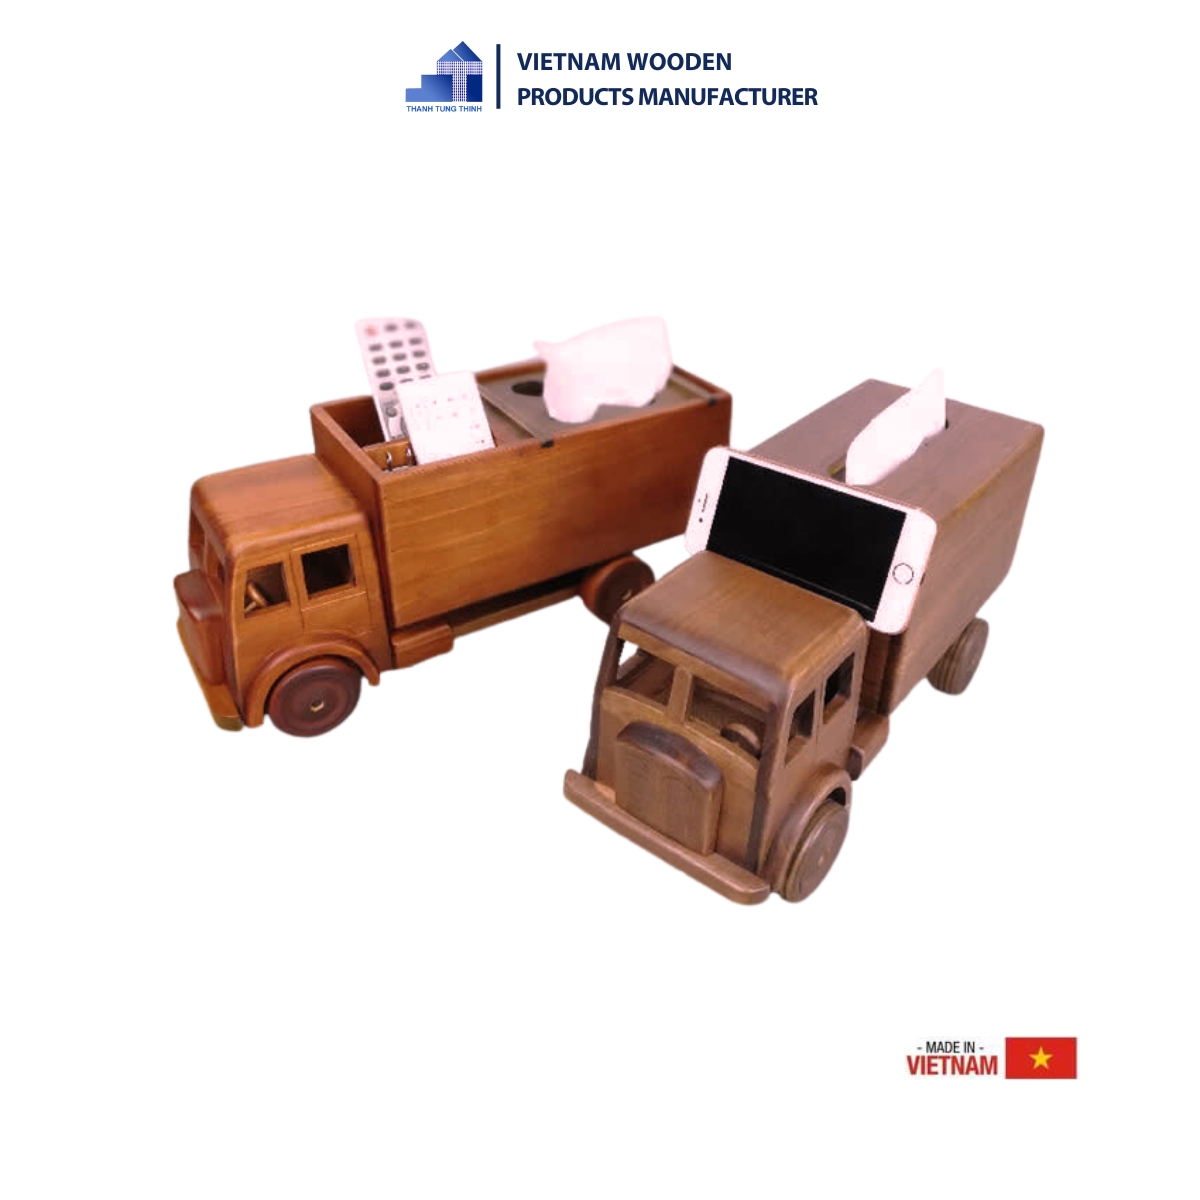 Wooden Tissue Box With Truck Design [TB005]